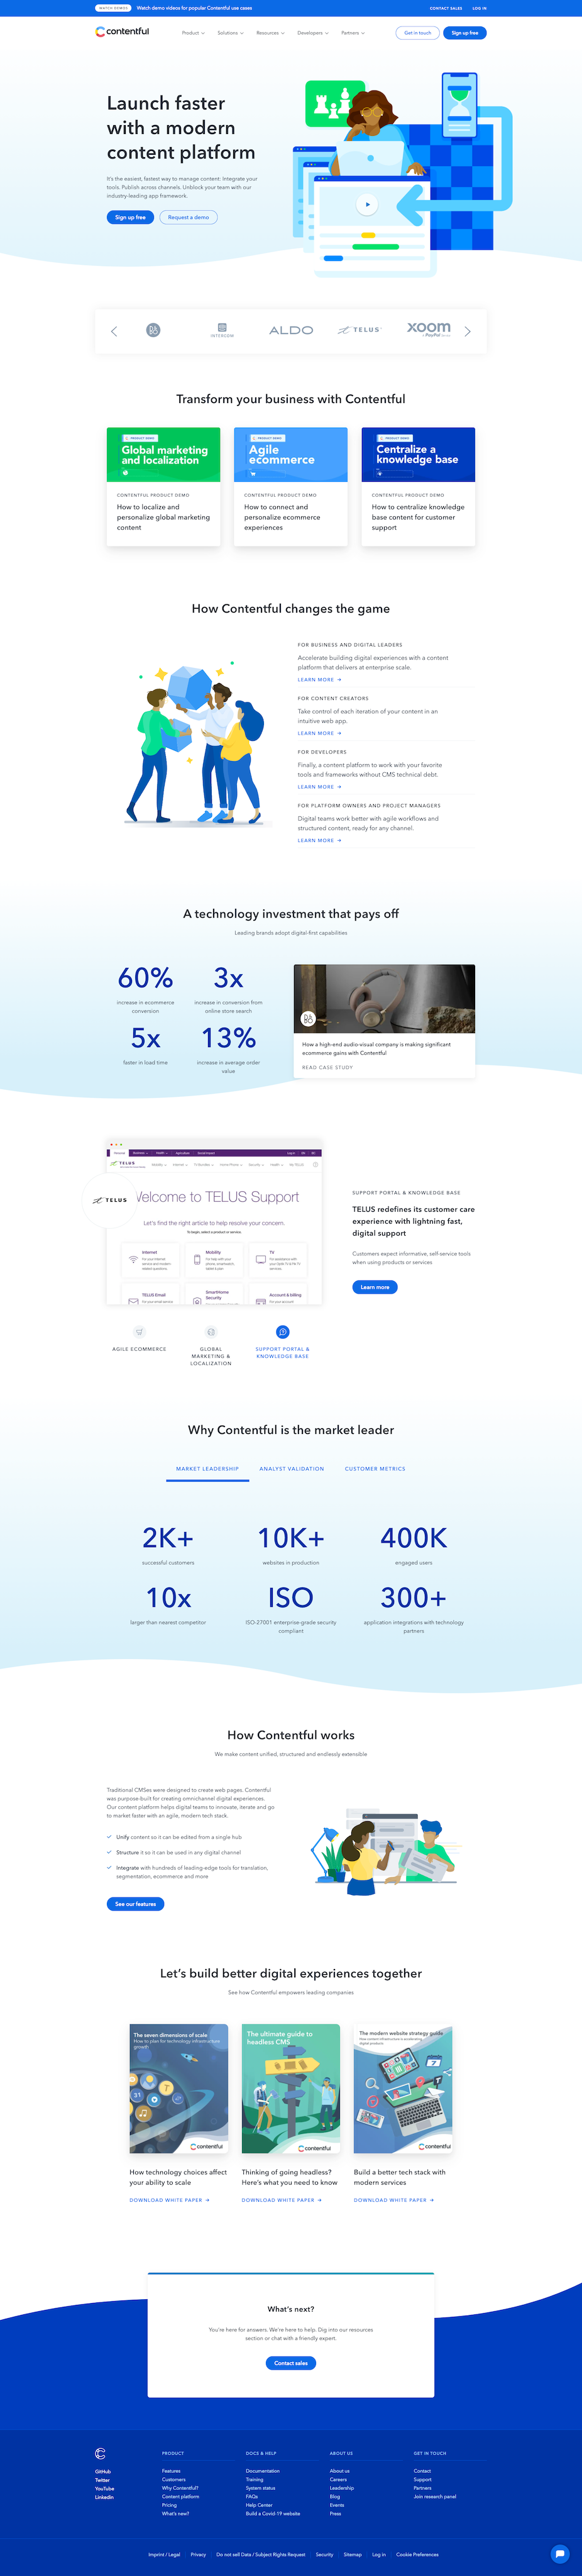 Contentful's home page design